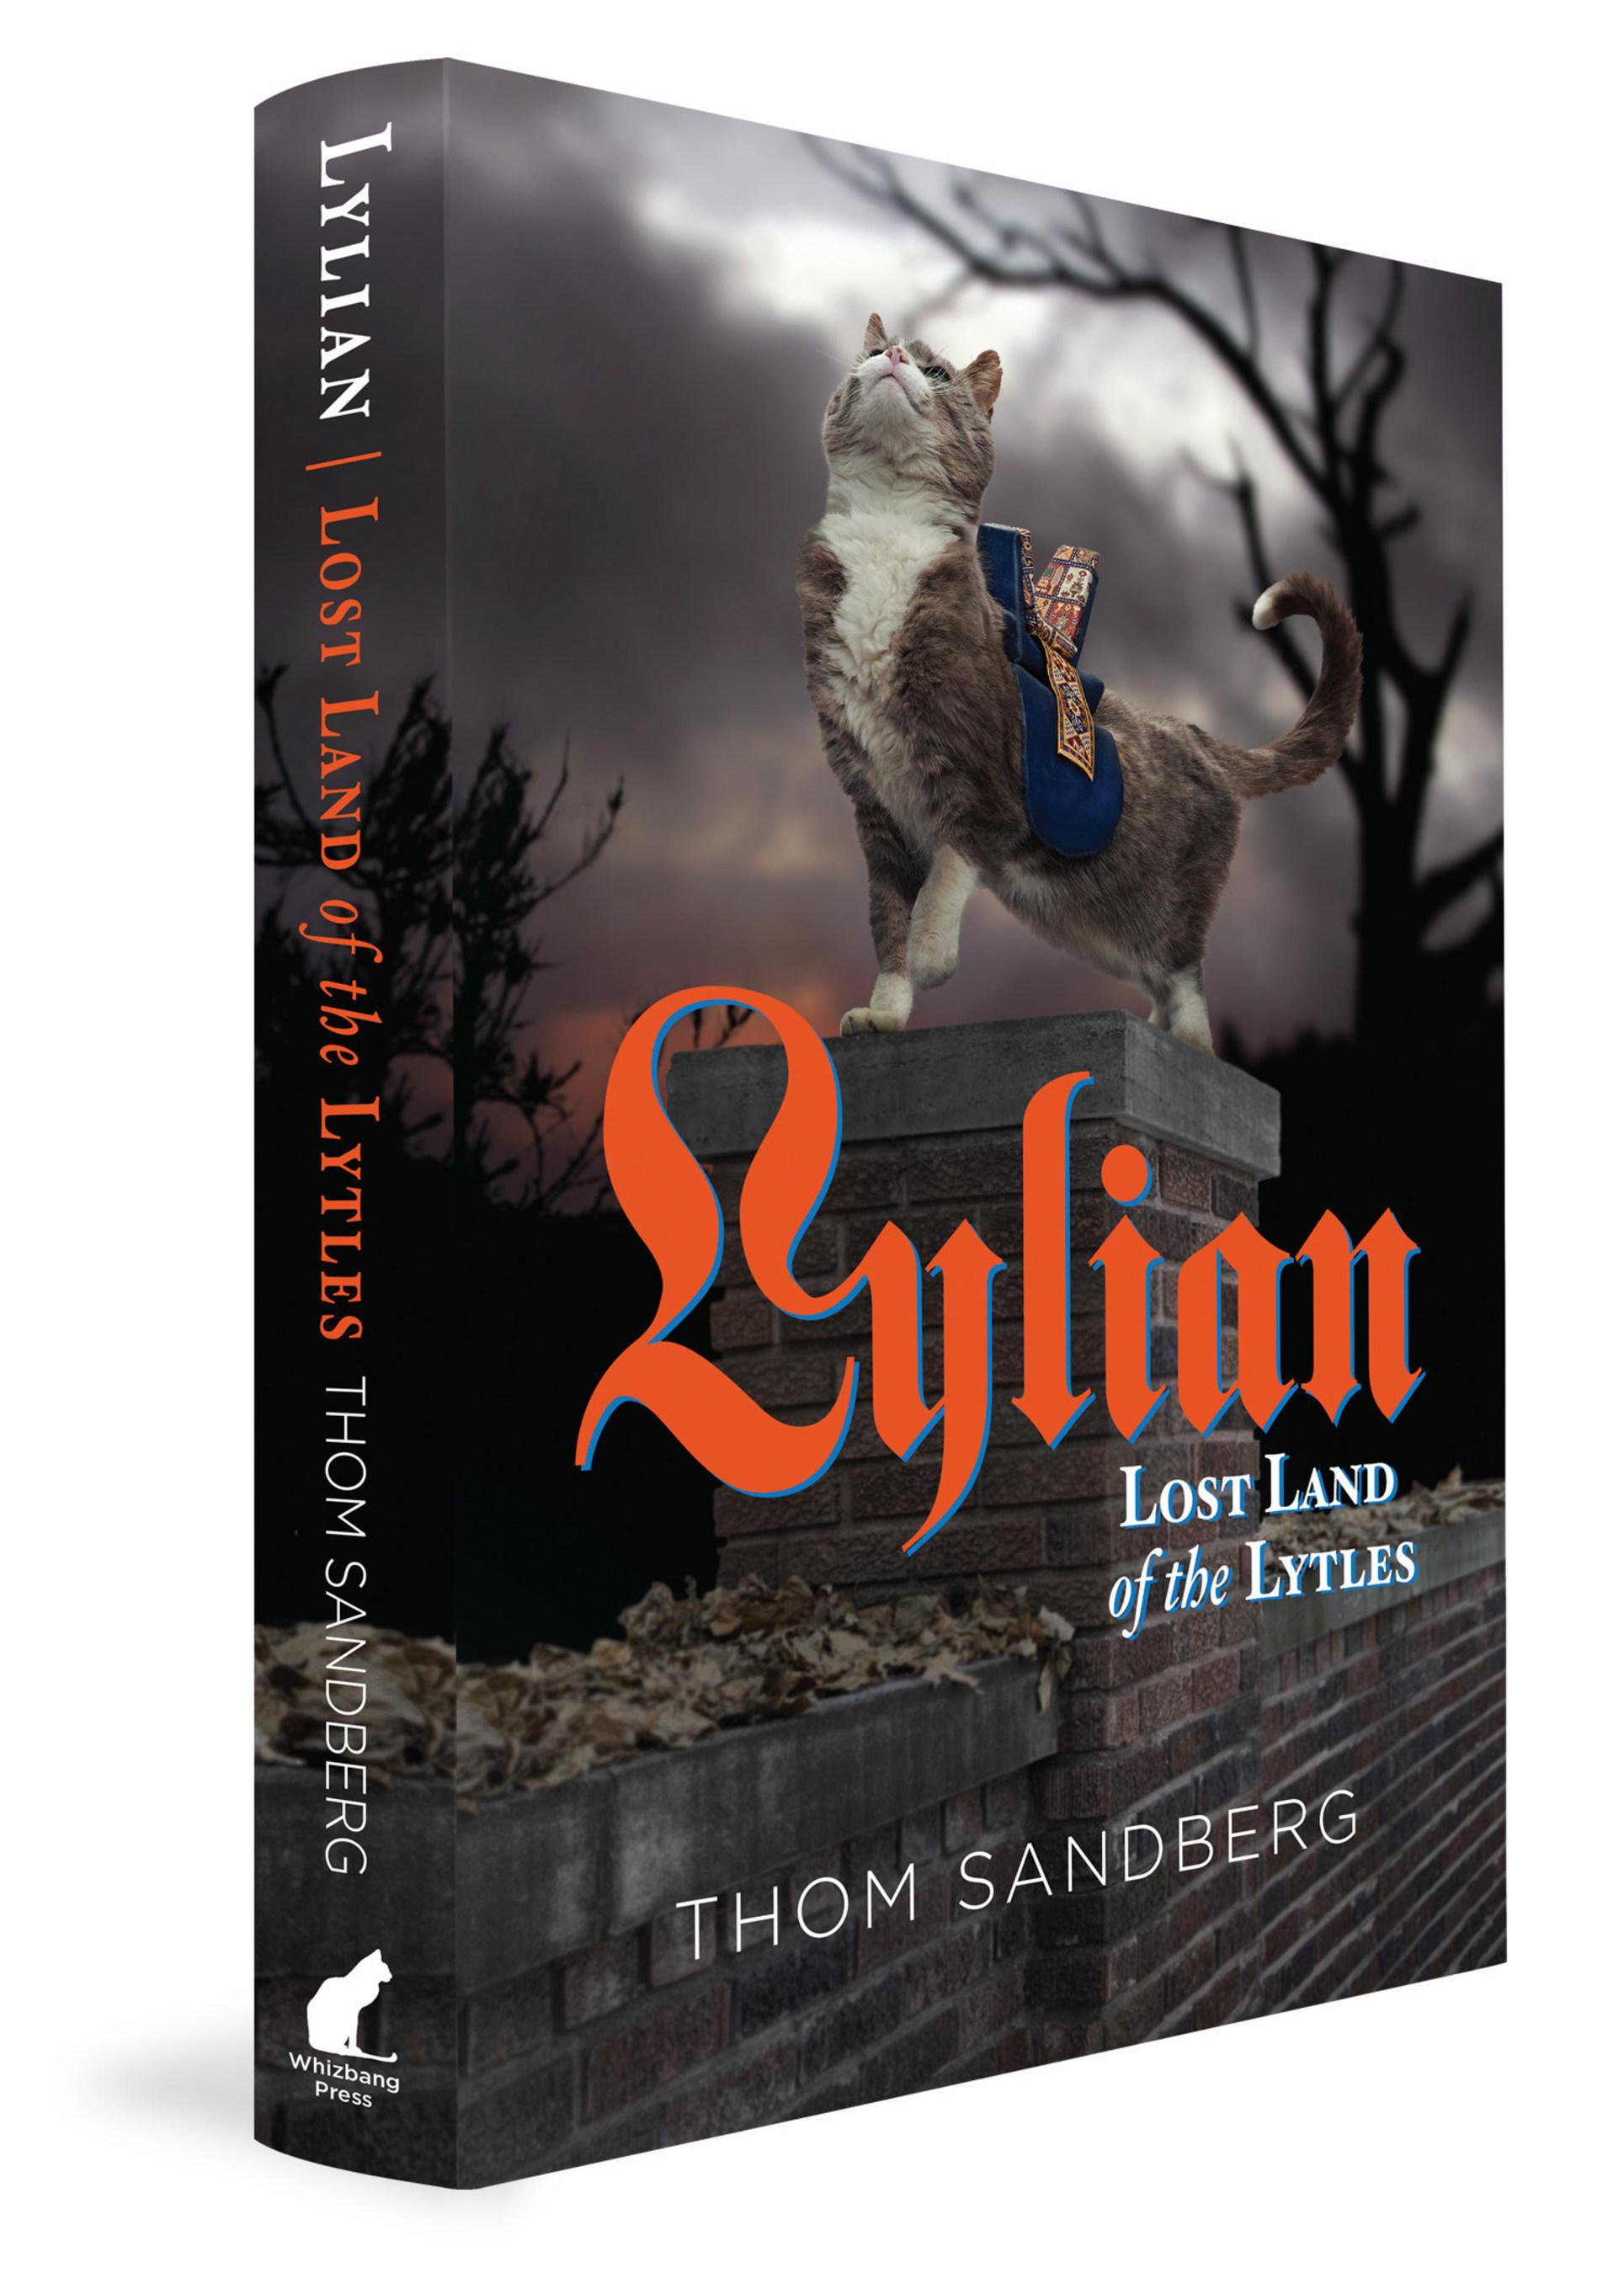 "Lylian; Lost Land of the Lytles" by Thom Sandberg